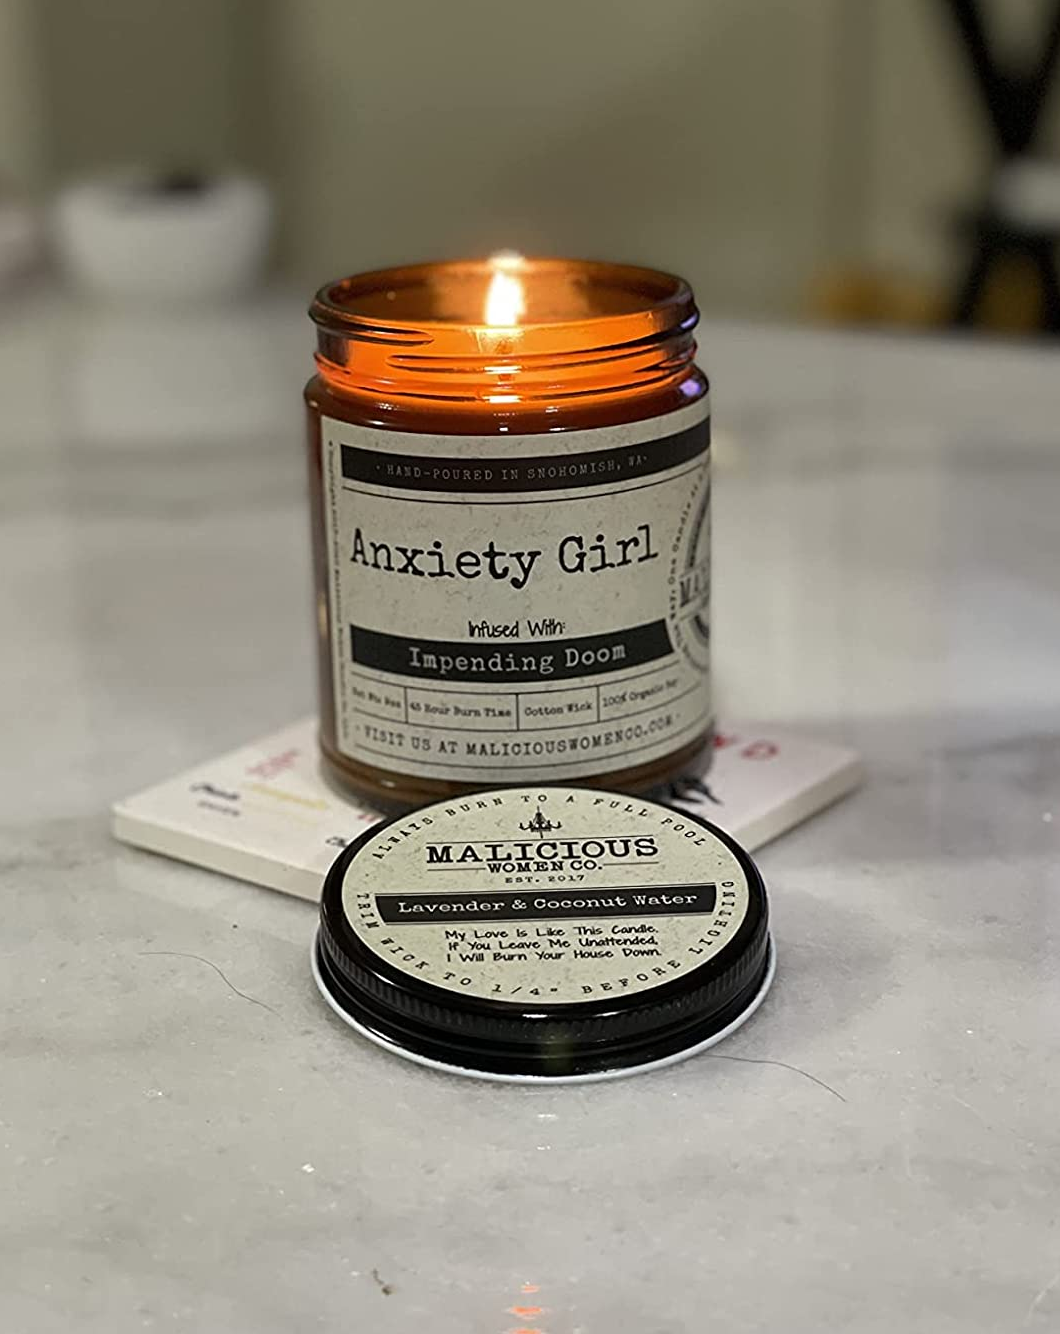 Reviewer photo of the candle with a label that says 